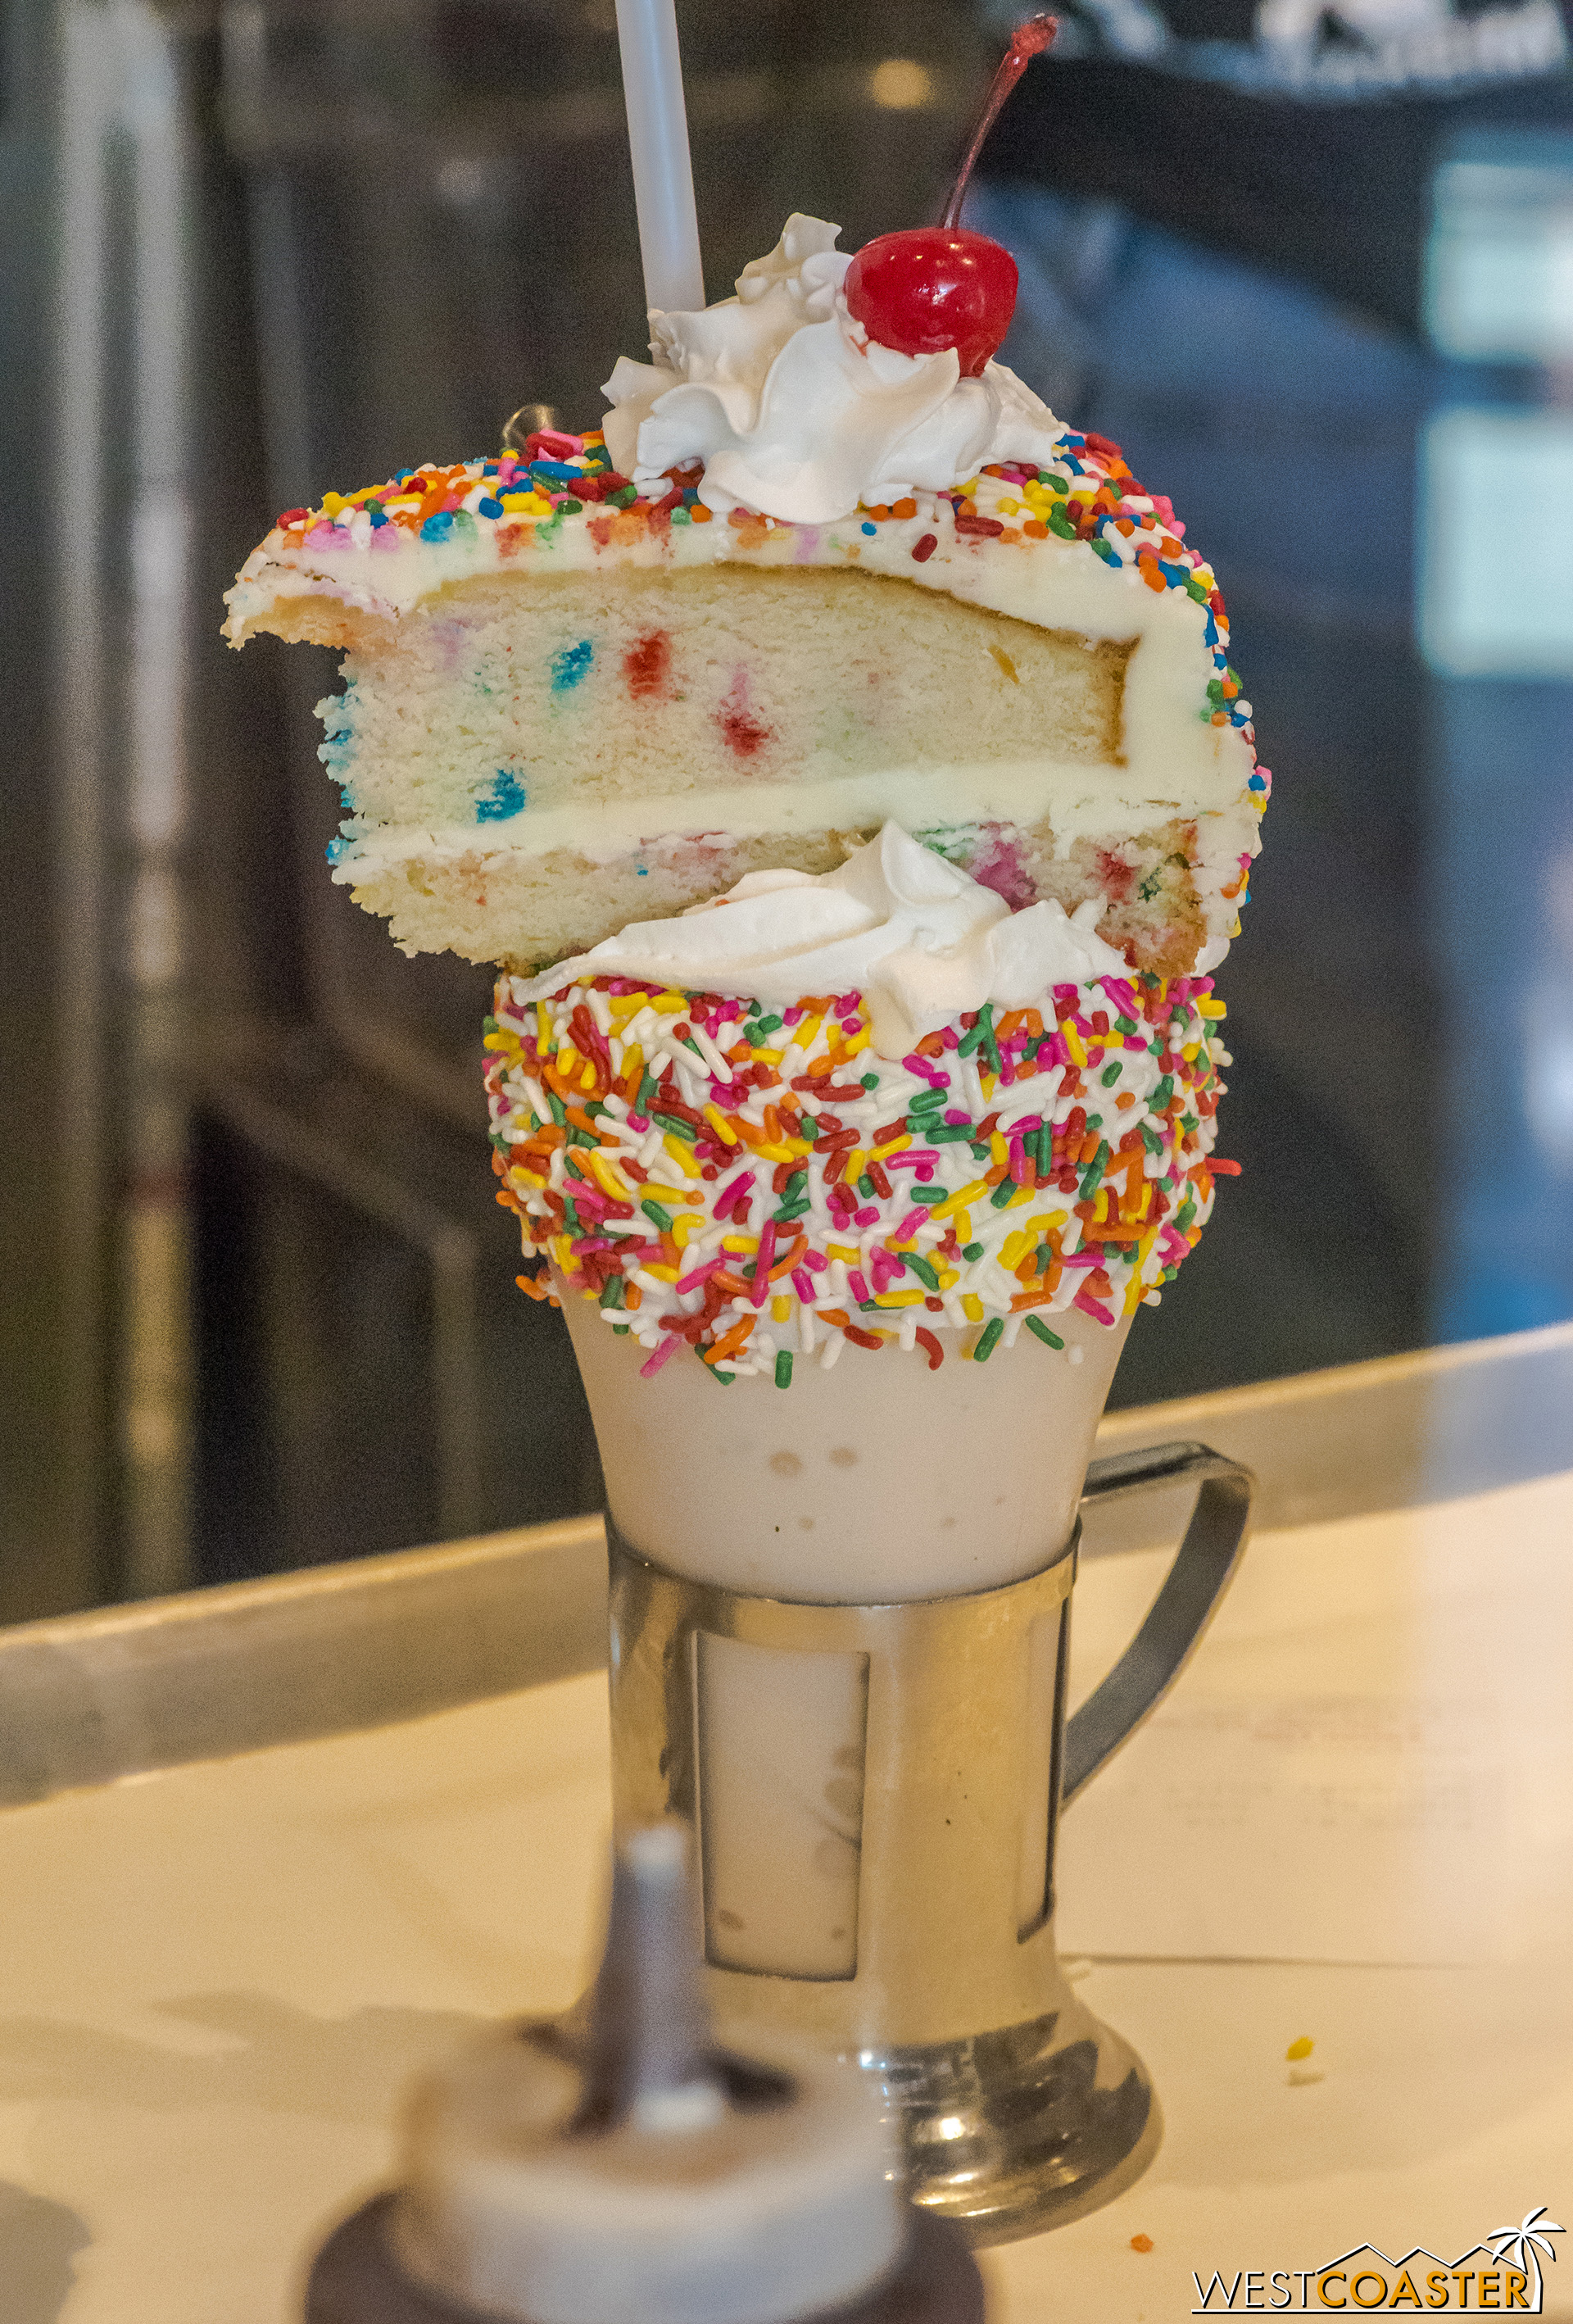  The Cake Shake, which is basically a birthday cake in shake form. Almost literally! 